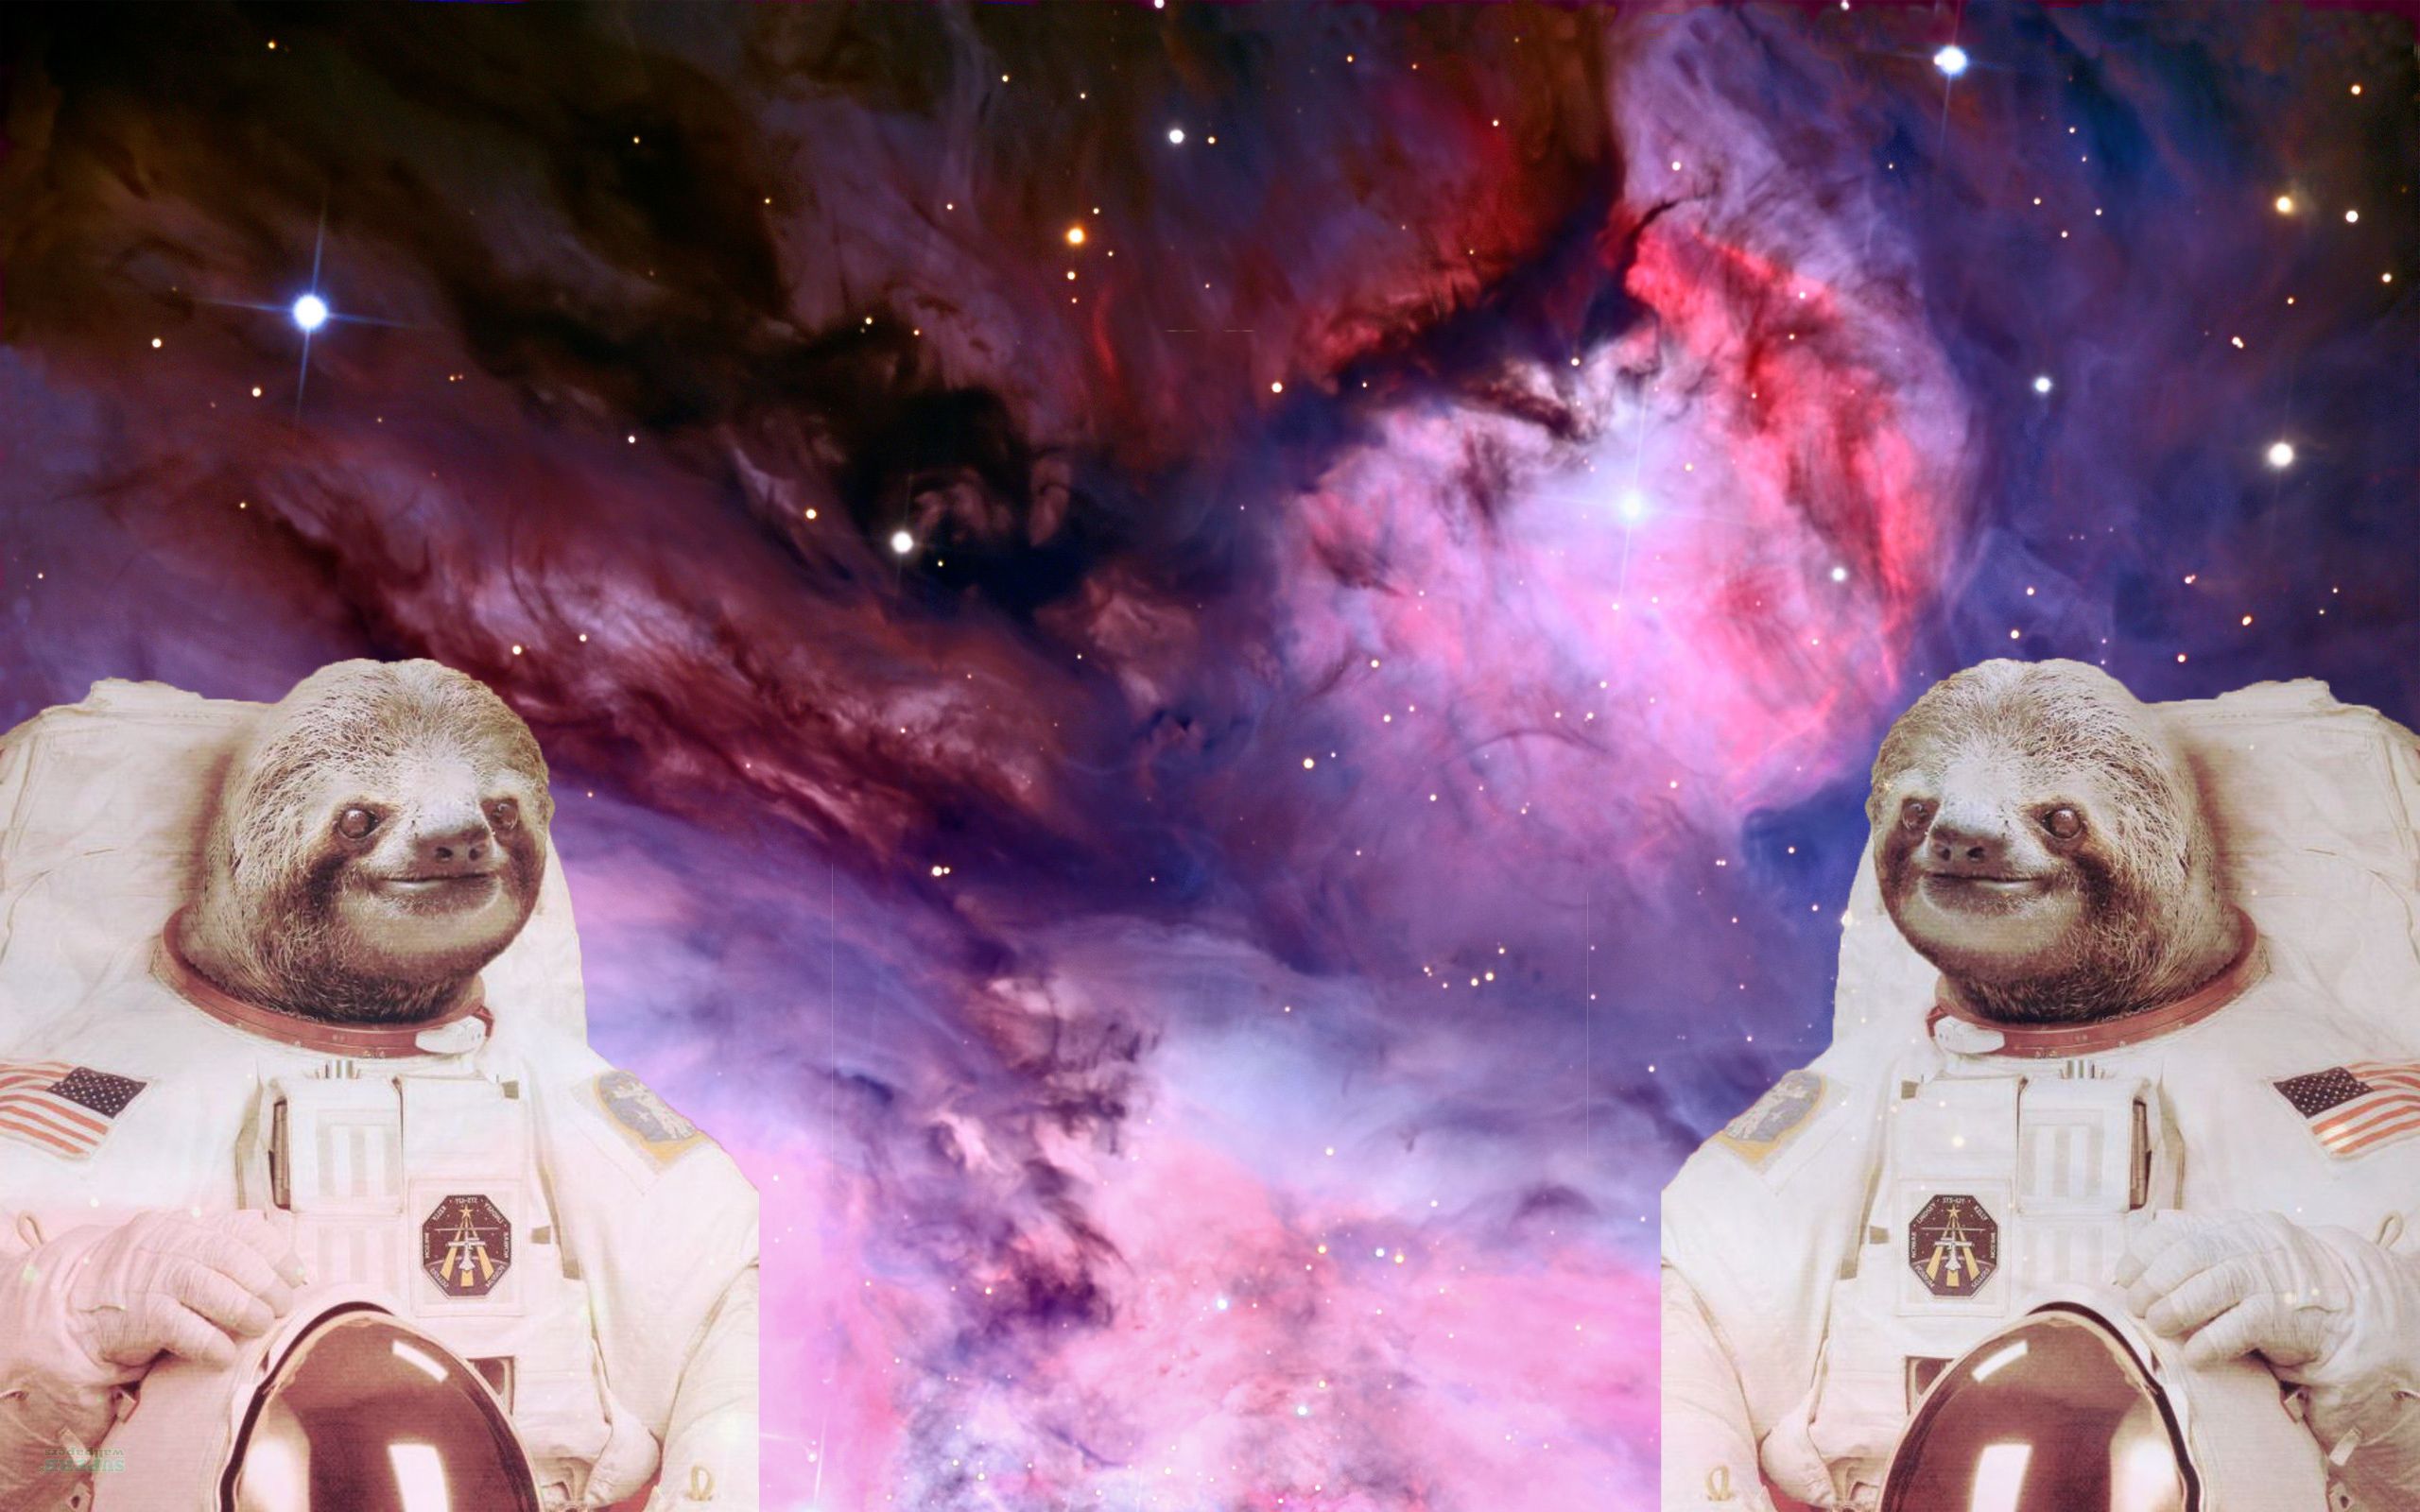 Astronaut Sloths in Space wallpaper I made wallpapers 2560x1600